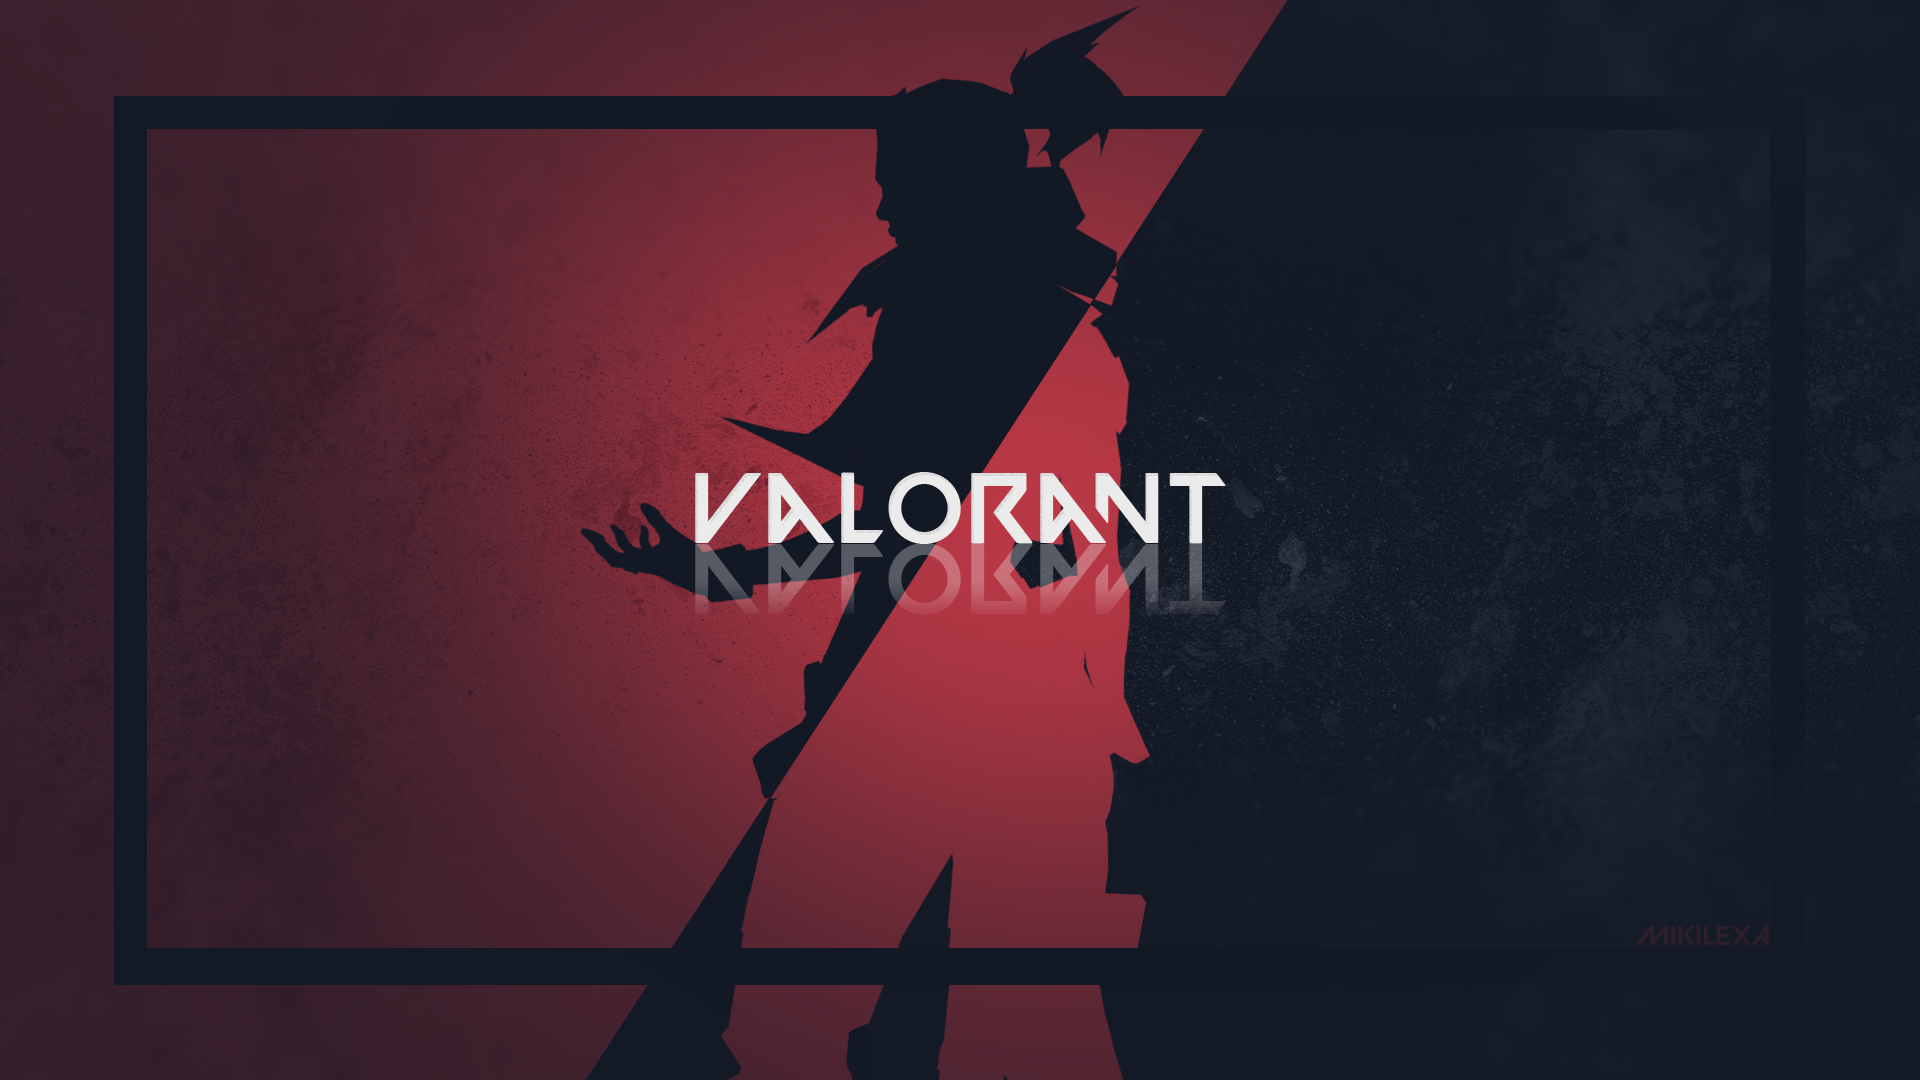 Free download made this minimalistic valorant wallpaper what do u